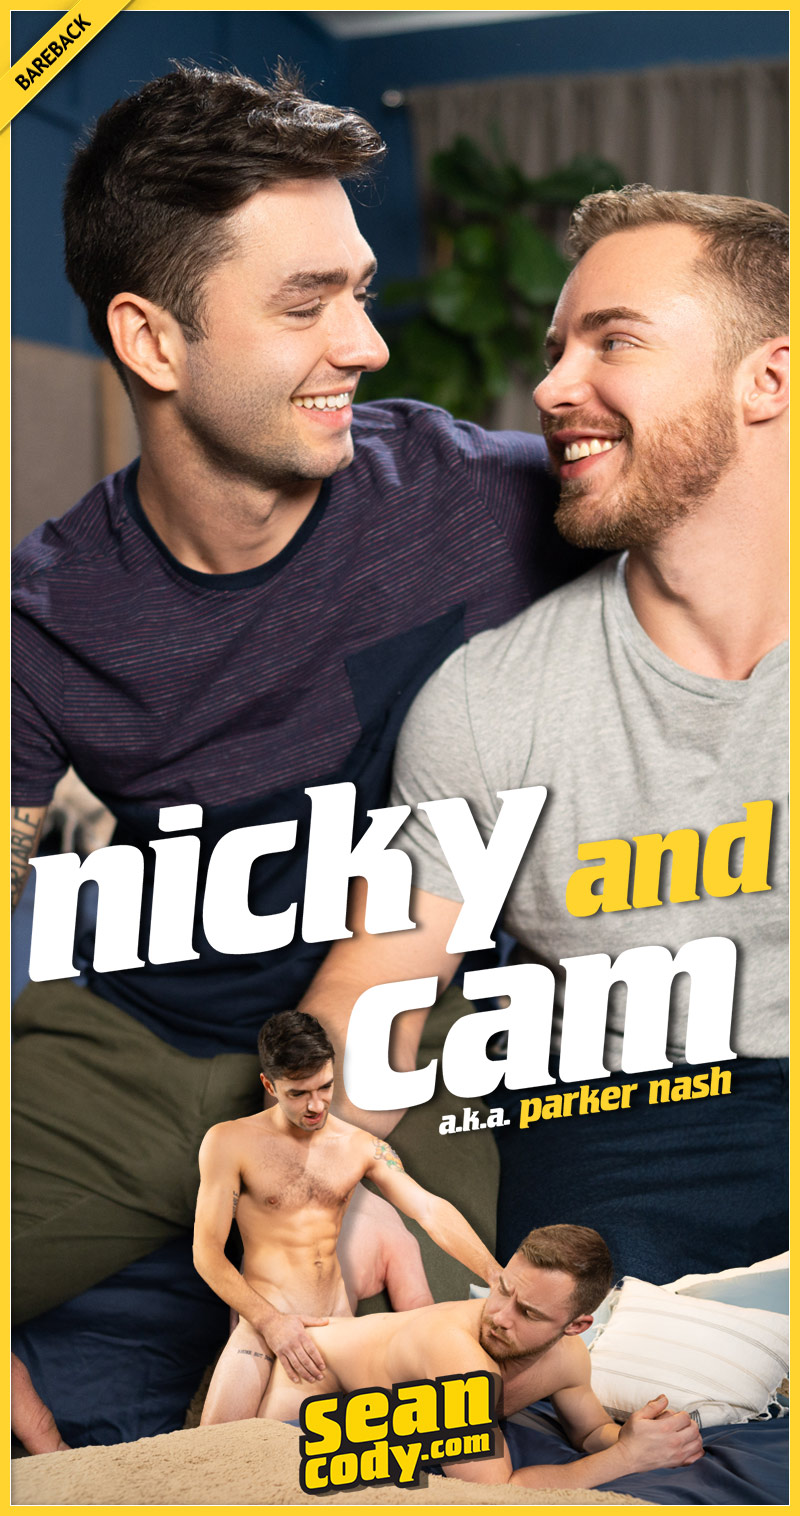 Nicky Returns After Half A Decade and Fucks Cam (a.k.a. Parker Nash) at SeanCody